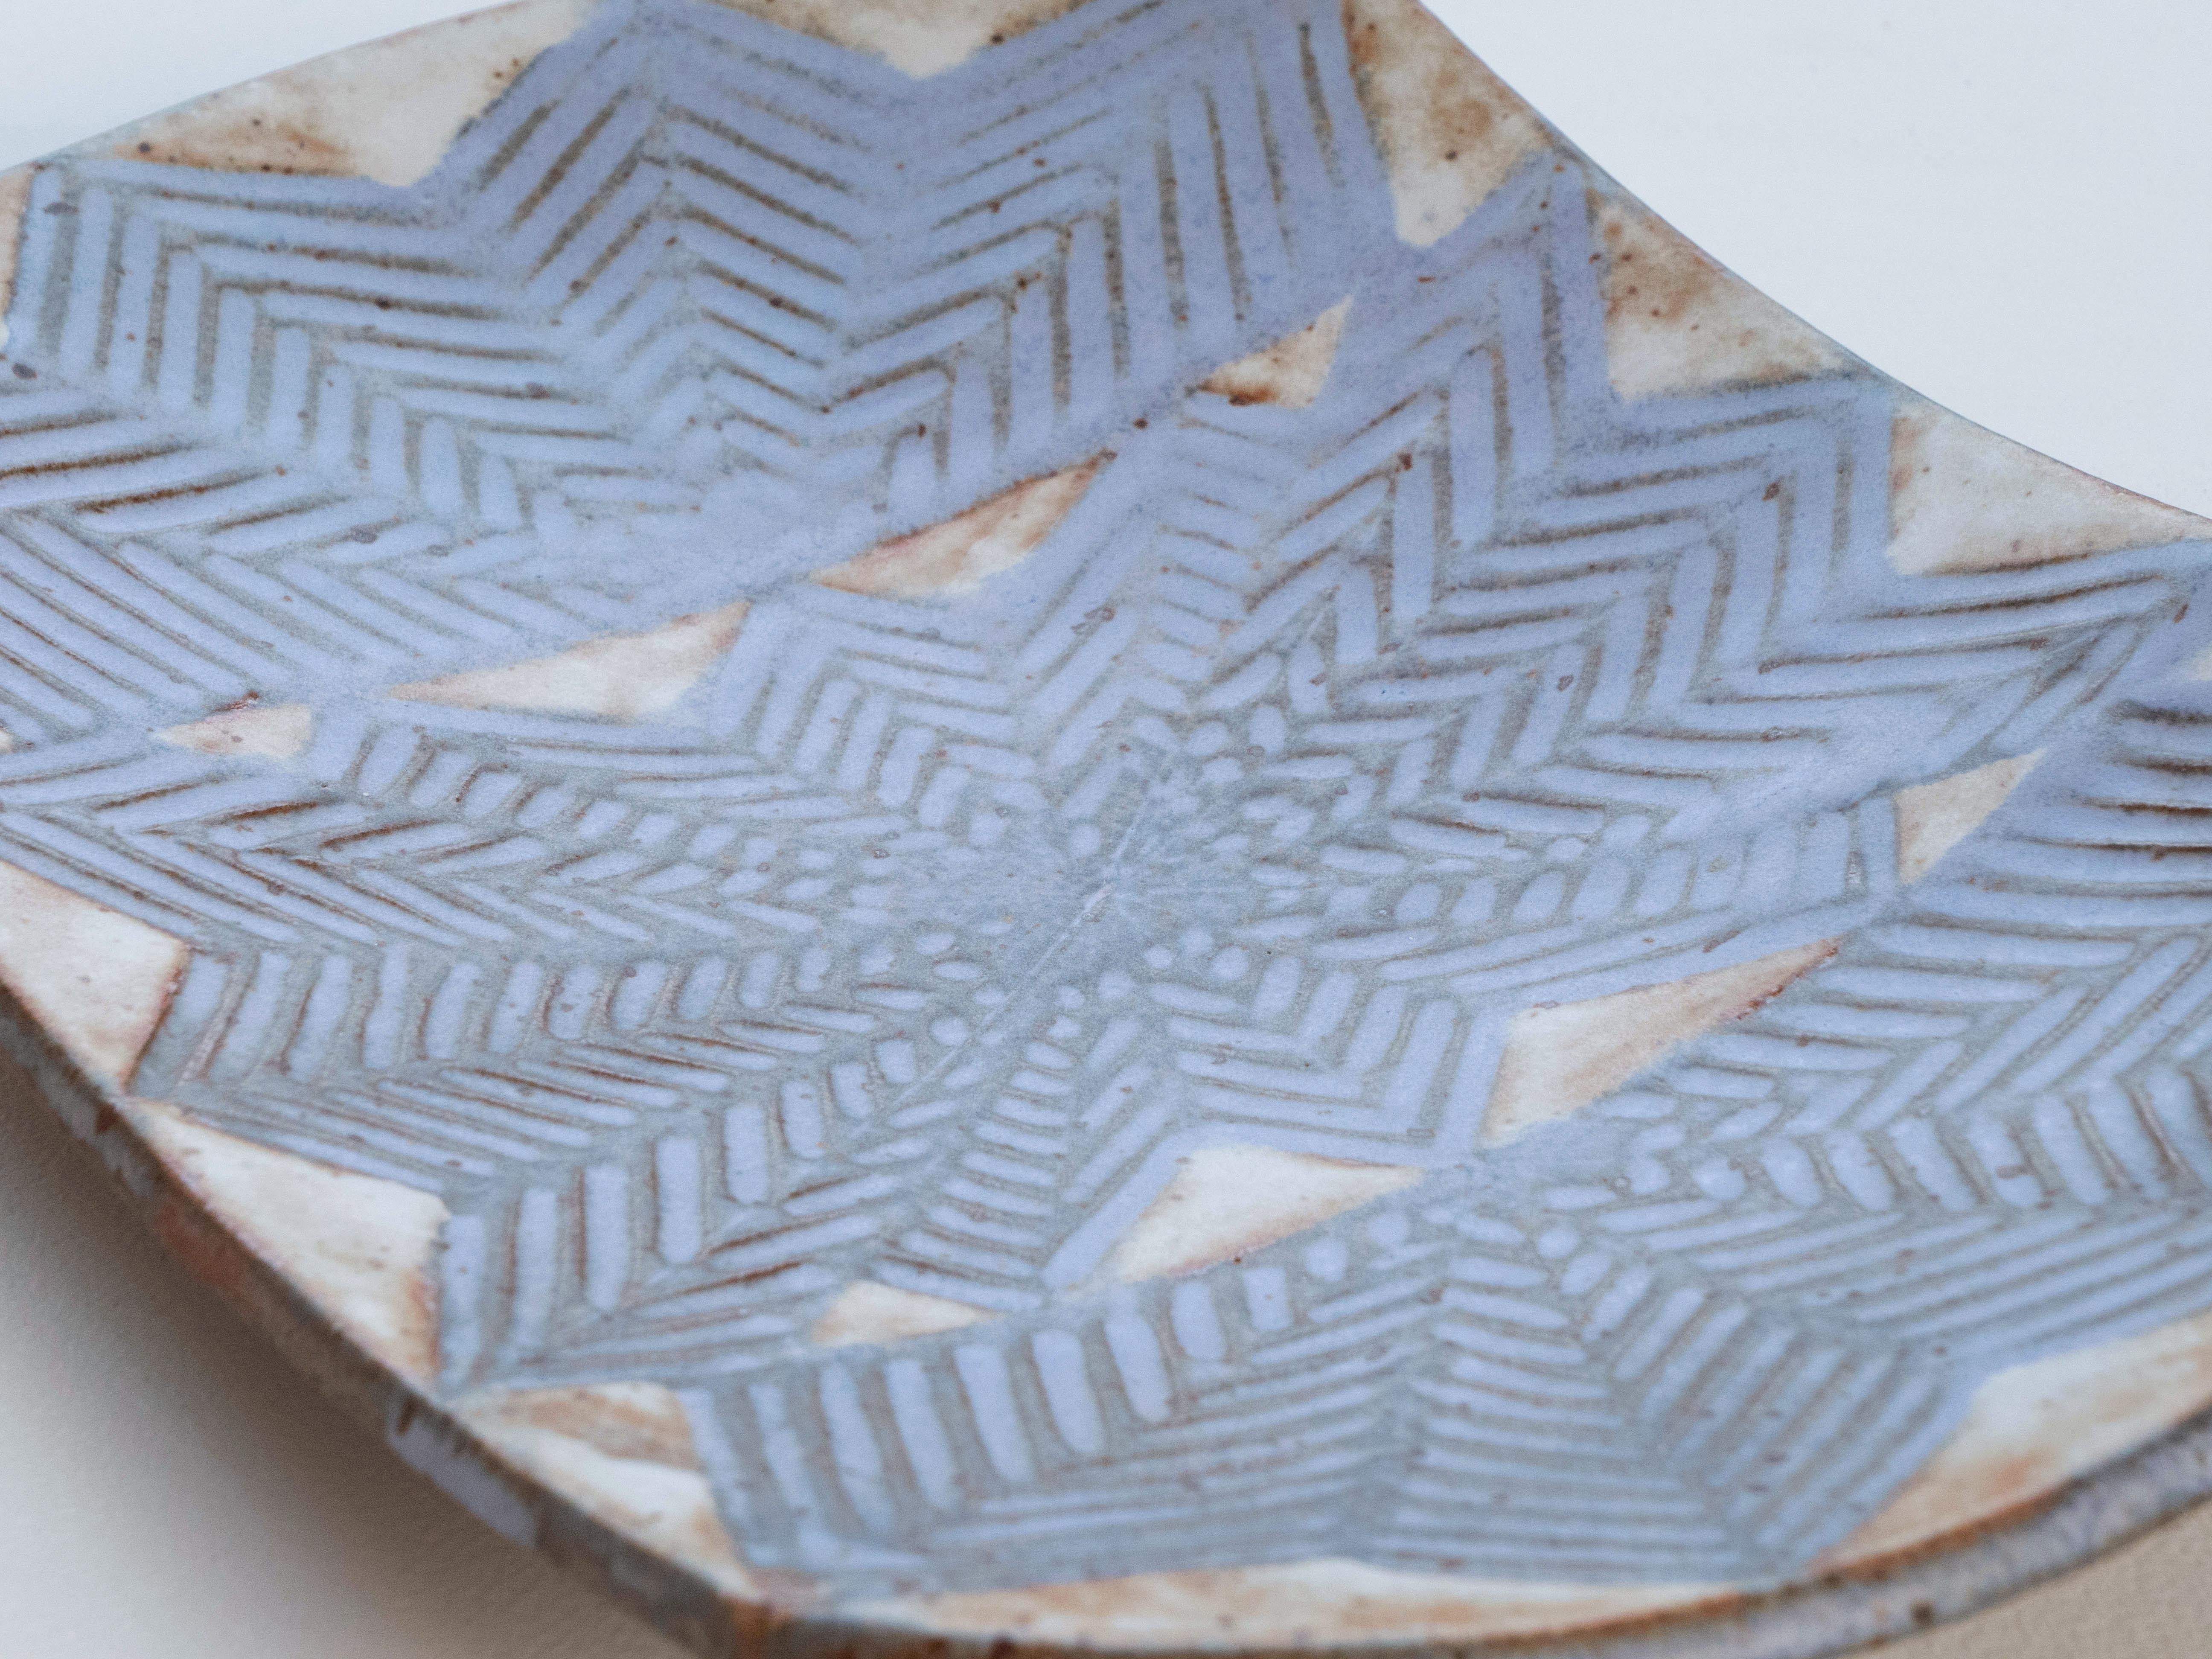 Purchased directly from Jerome & Evelyn Ackerman's personal studio at their former home in Culver City, California. This dish was hand thrown and features a very beautiful geometric pattern. It is excellent condition with no damage to note. Signed